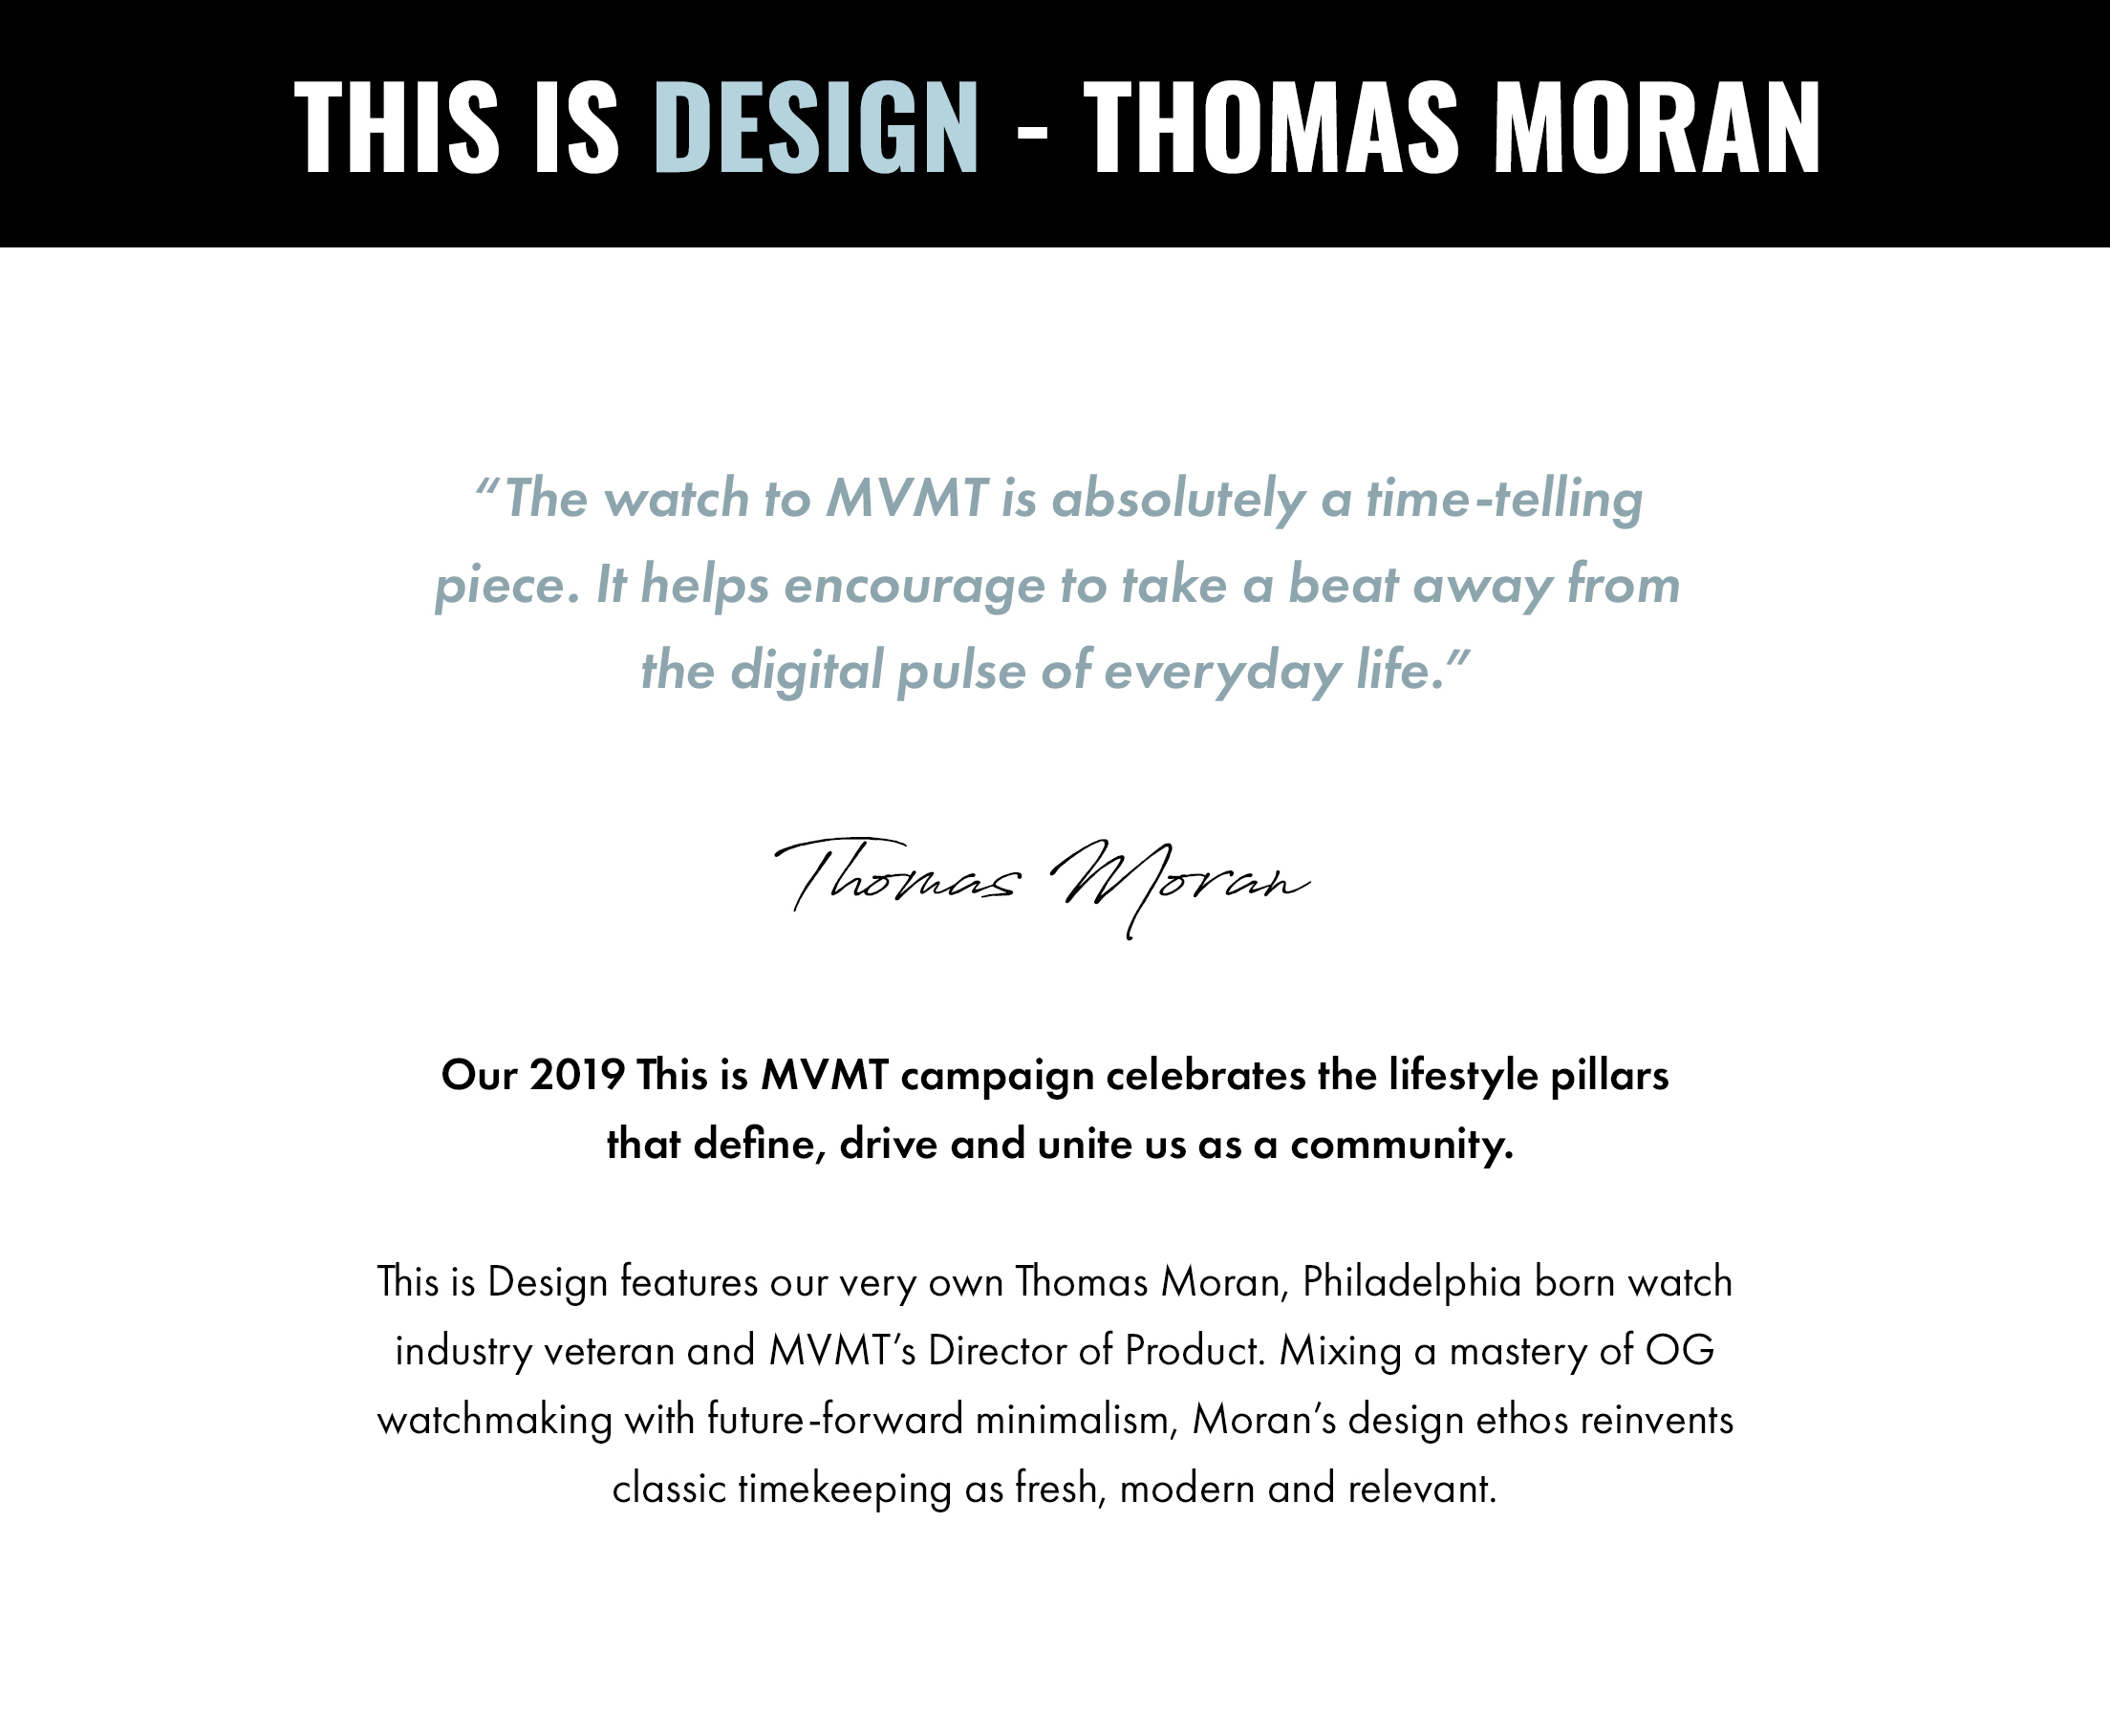 This is Design - Thomas Moran. "The watch to MVMT is absolutely a time-telling piece. It helps encourage to take a beat away from the digital pulse of everyday life." -Thomas Moran. Our 2019 This is MVMT campaign celebrates the lifestyle pillars that define, drive and unite us as a community. This is Design features our very own Thomas Moran, Philadelphia born watch industry veteran and MVMT's Director of Product. Mixing a mastery of OG watchmaking with future-forward minimalism, Moran's design ethos reinvents classic timekeeping as fresh, modern and relevant.